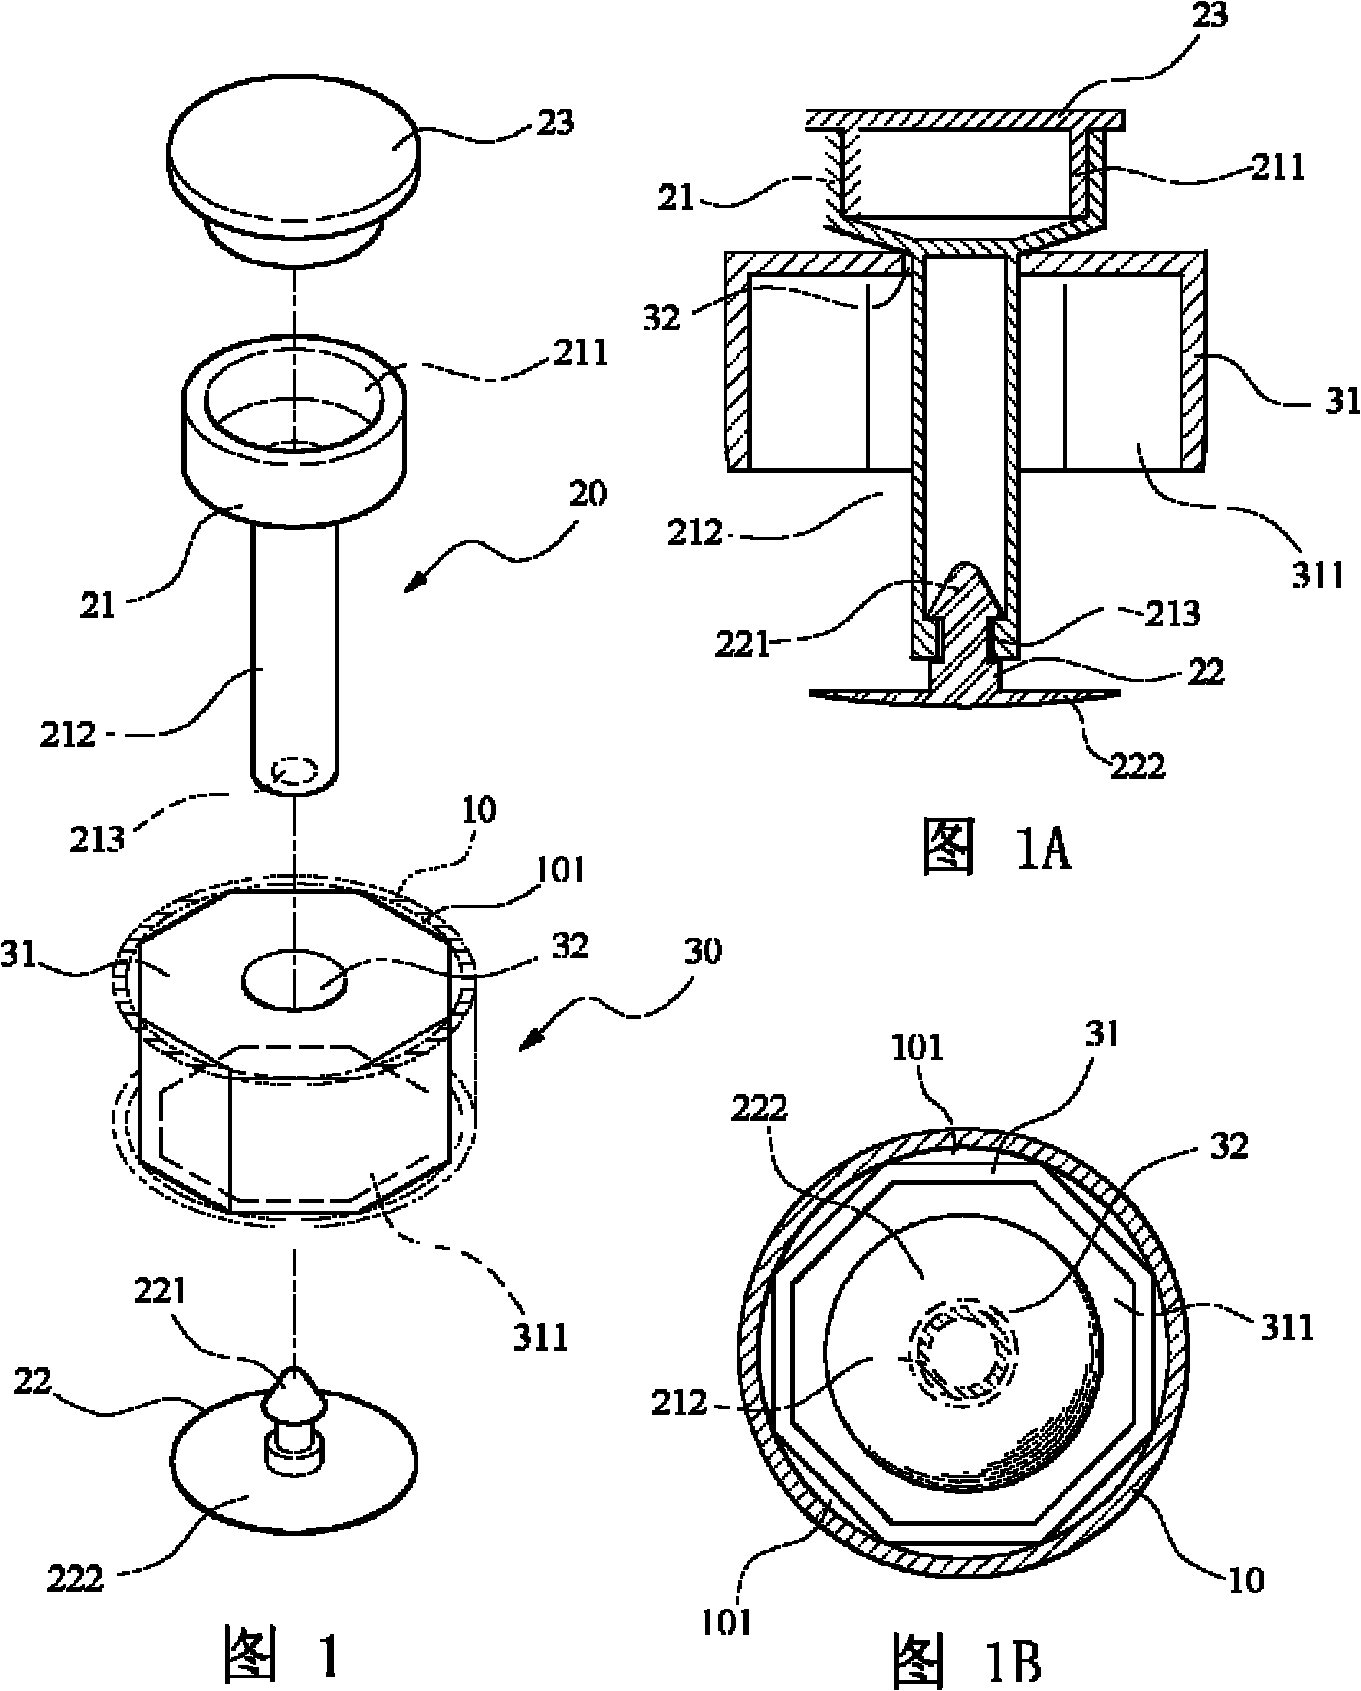 Drip infusion fixer and safety infusion water-sealing device